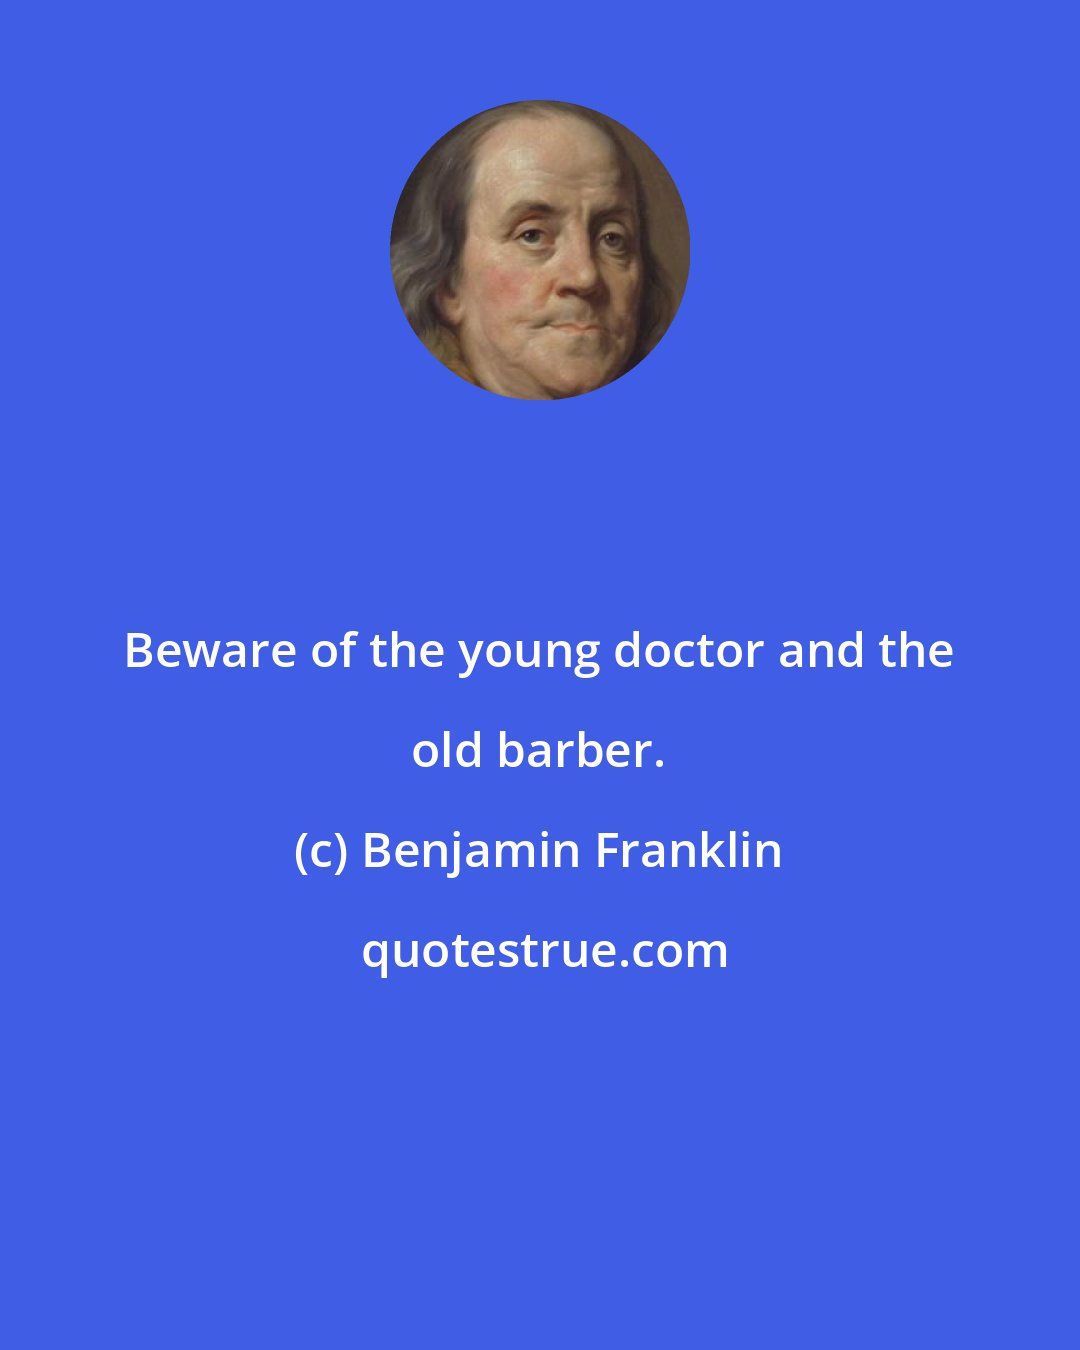 Benjamin Franklin: Beware of the young doctor and the old barber.